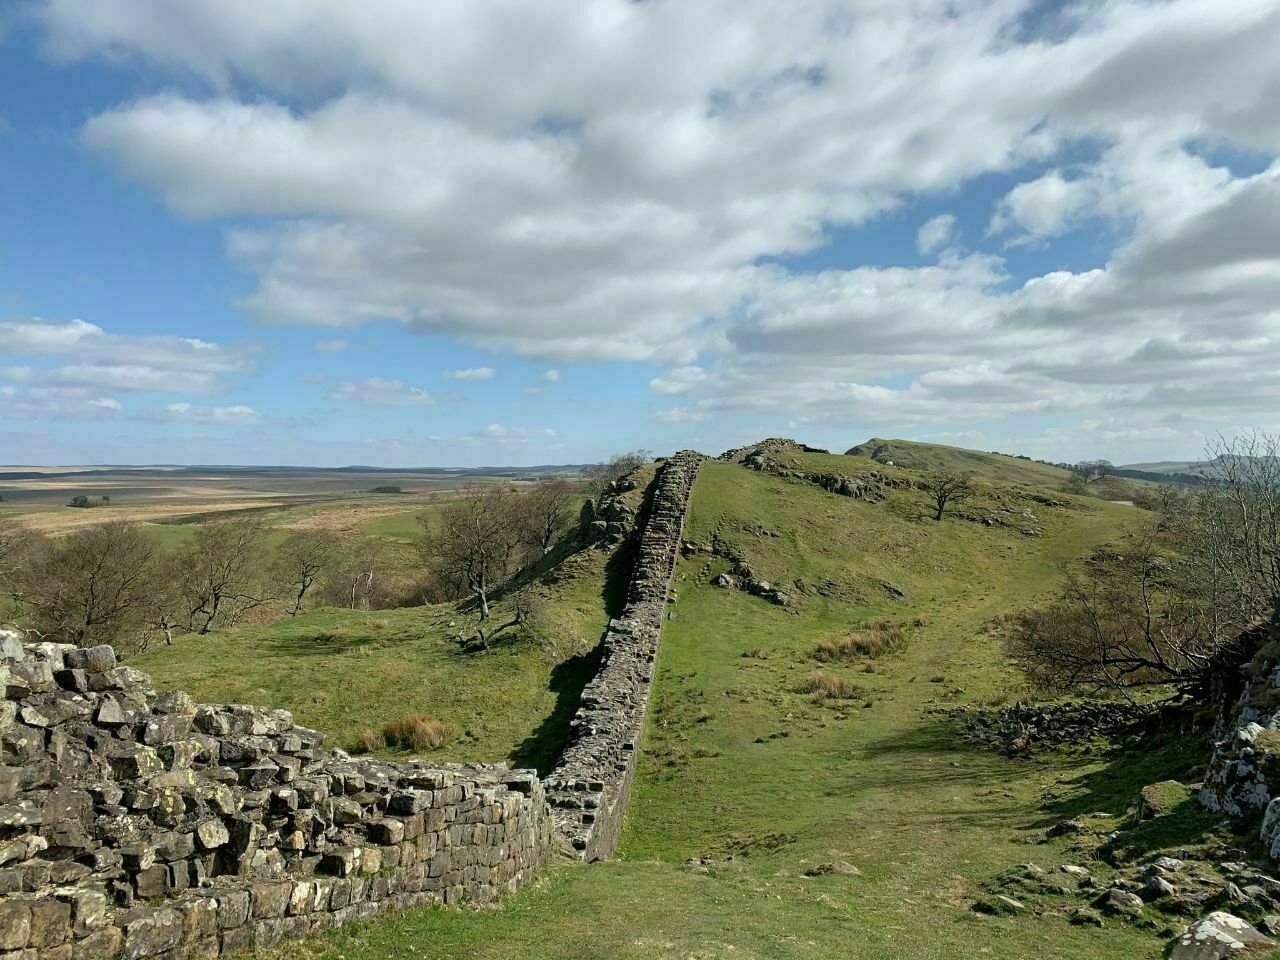 View of Hadrian’s Wall looking East towards Turret 45a